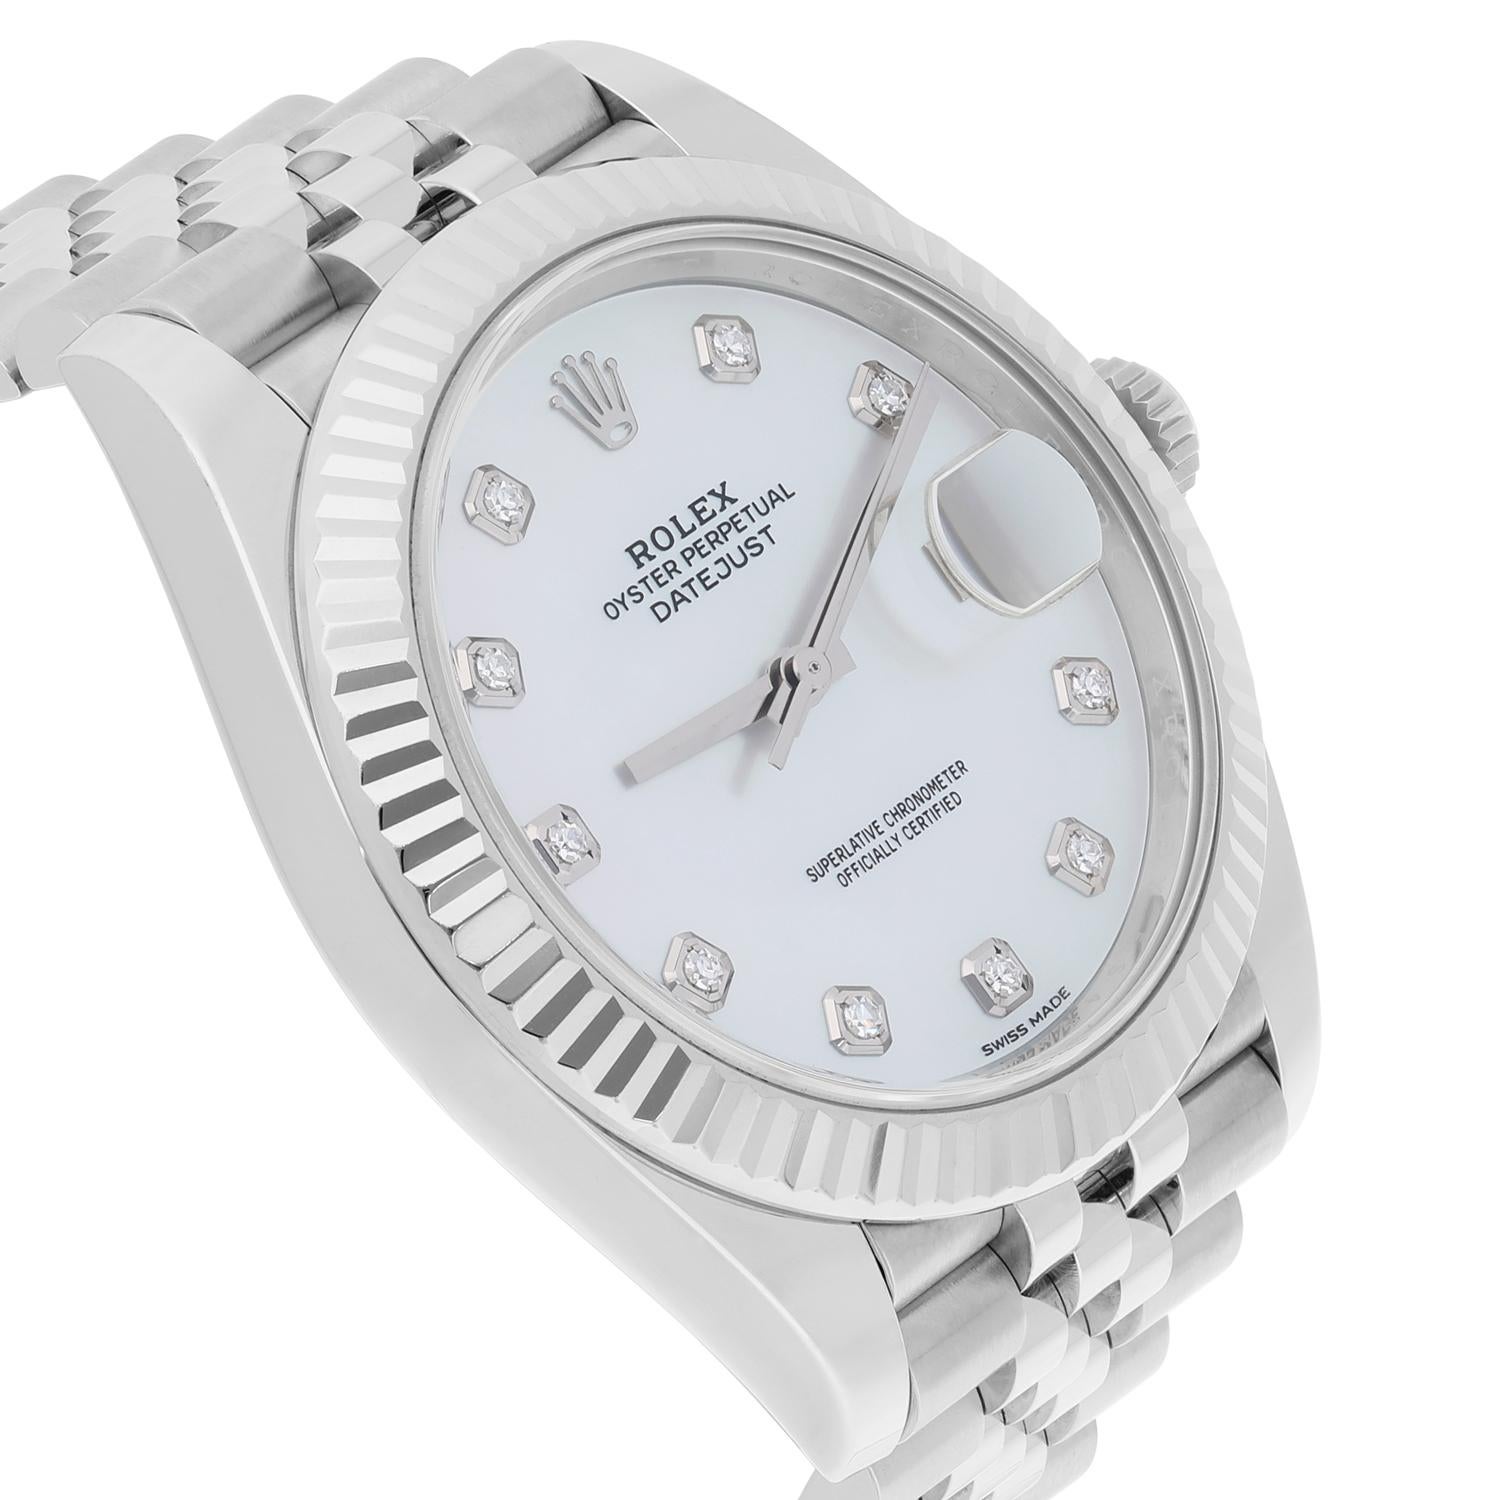 datejust 41 mother of pearl